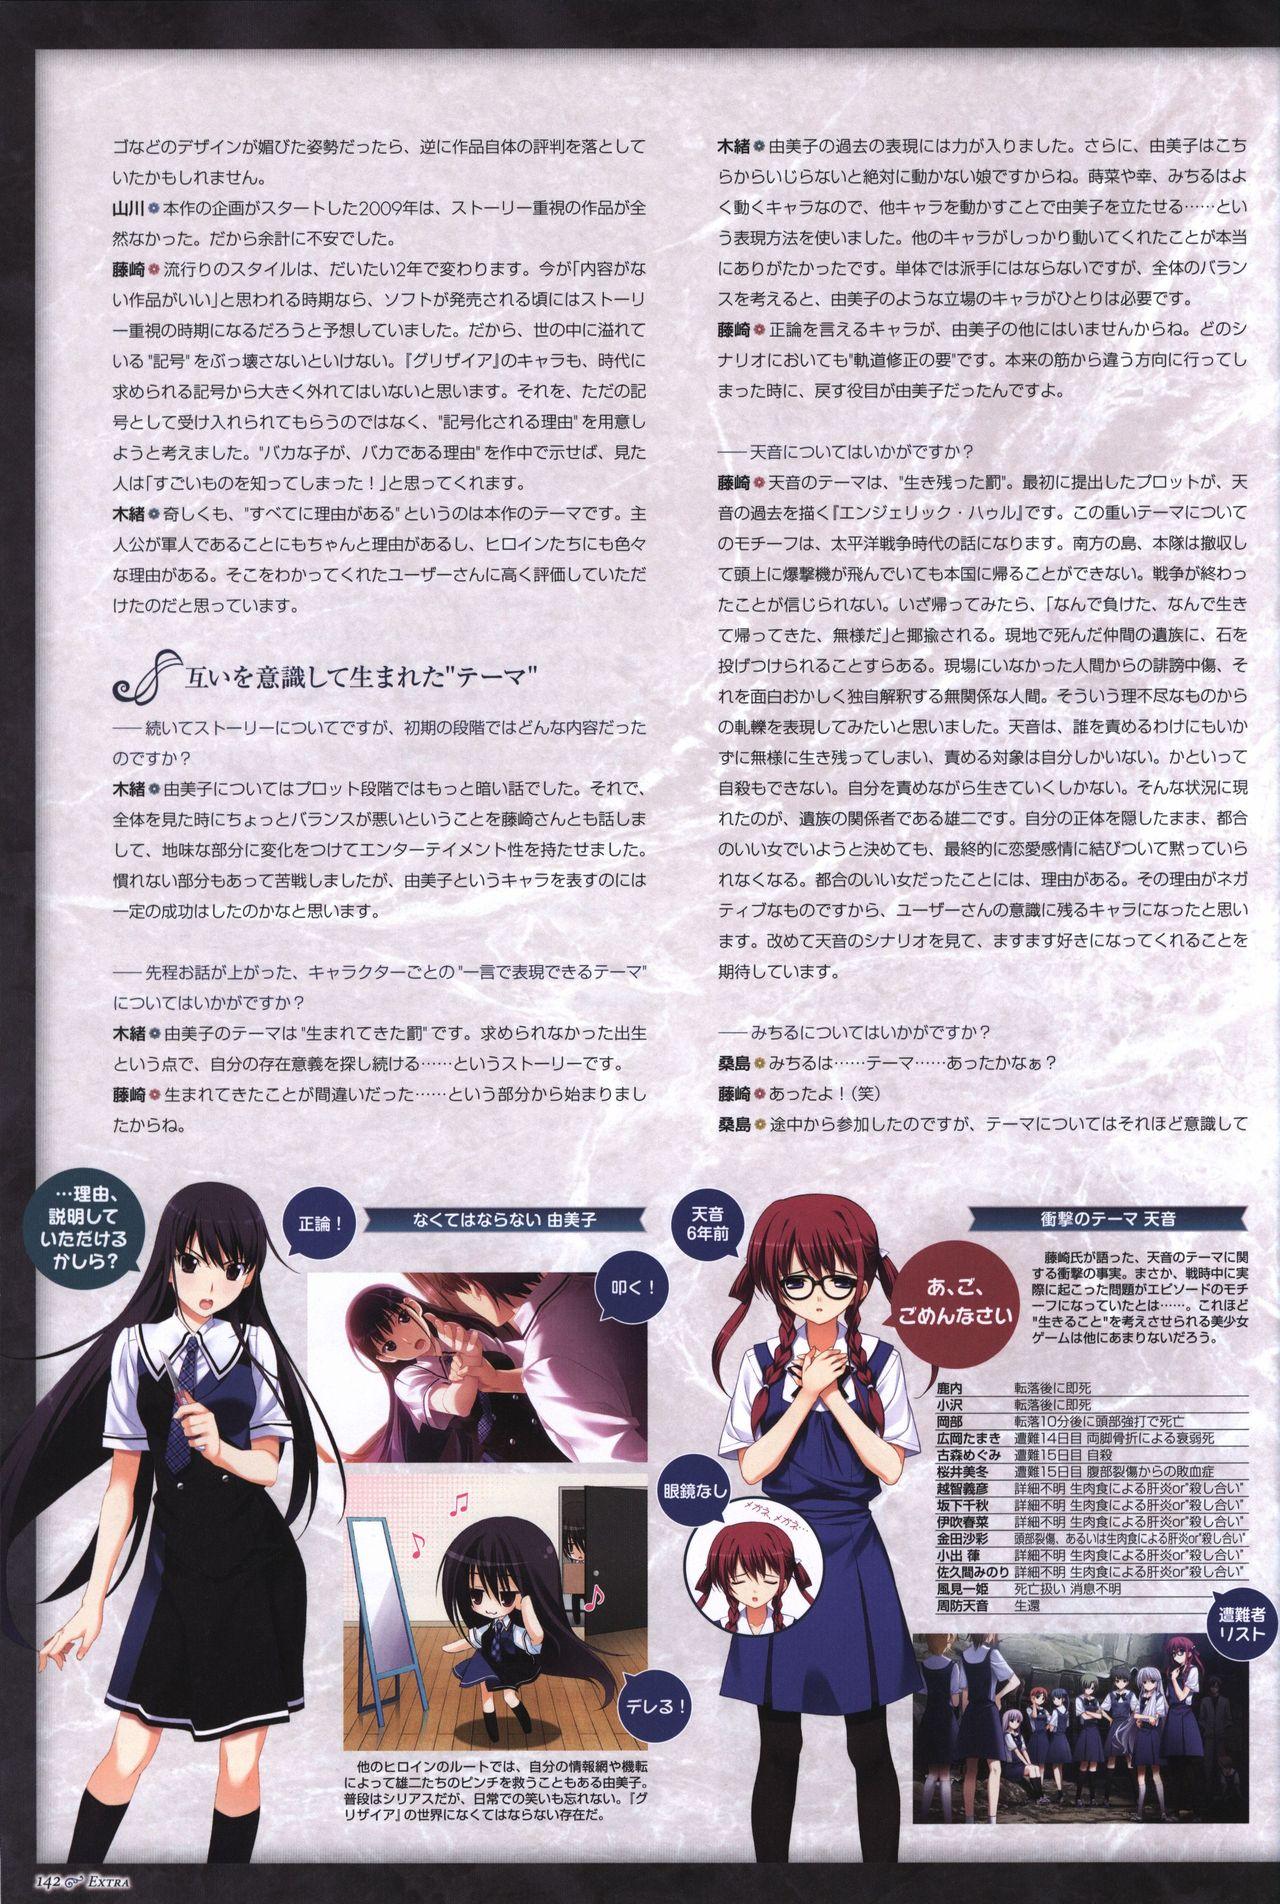 The Fruit of Grisaia Visual FanBook 142